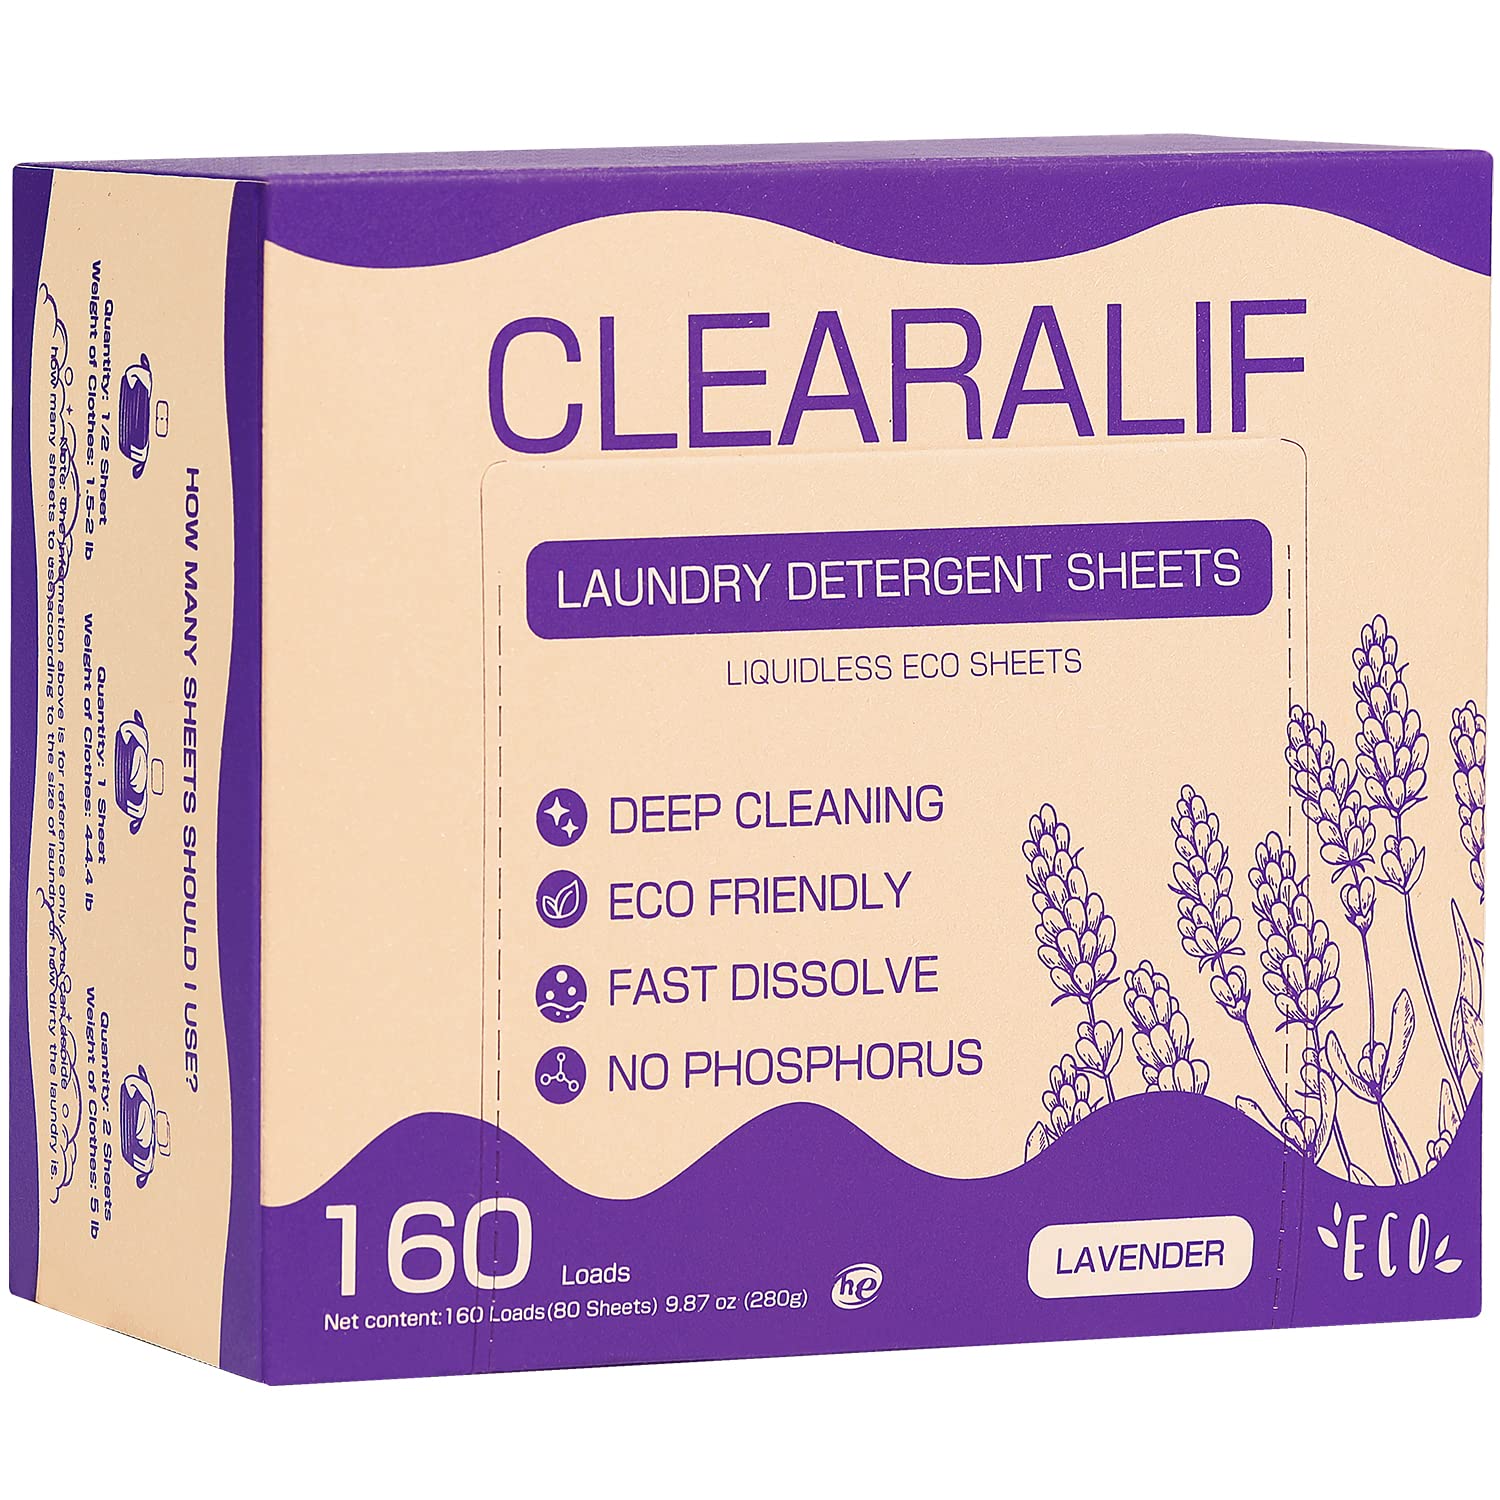 CLEARALIF Laundry Detergent Sheets Fresh Flower